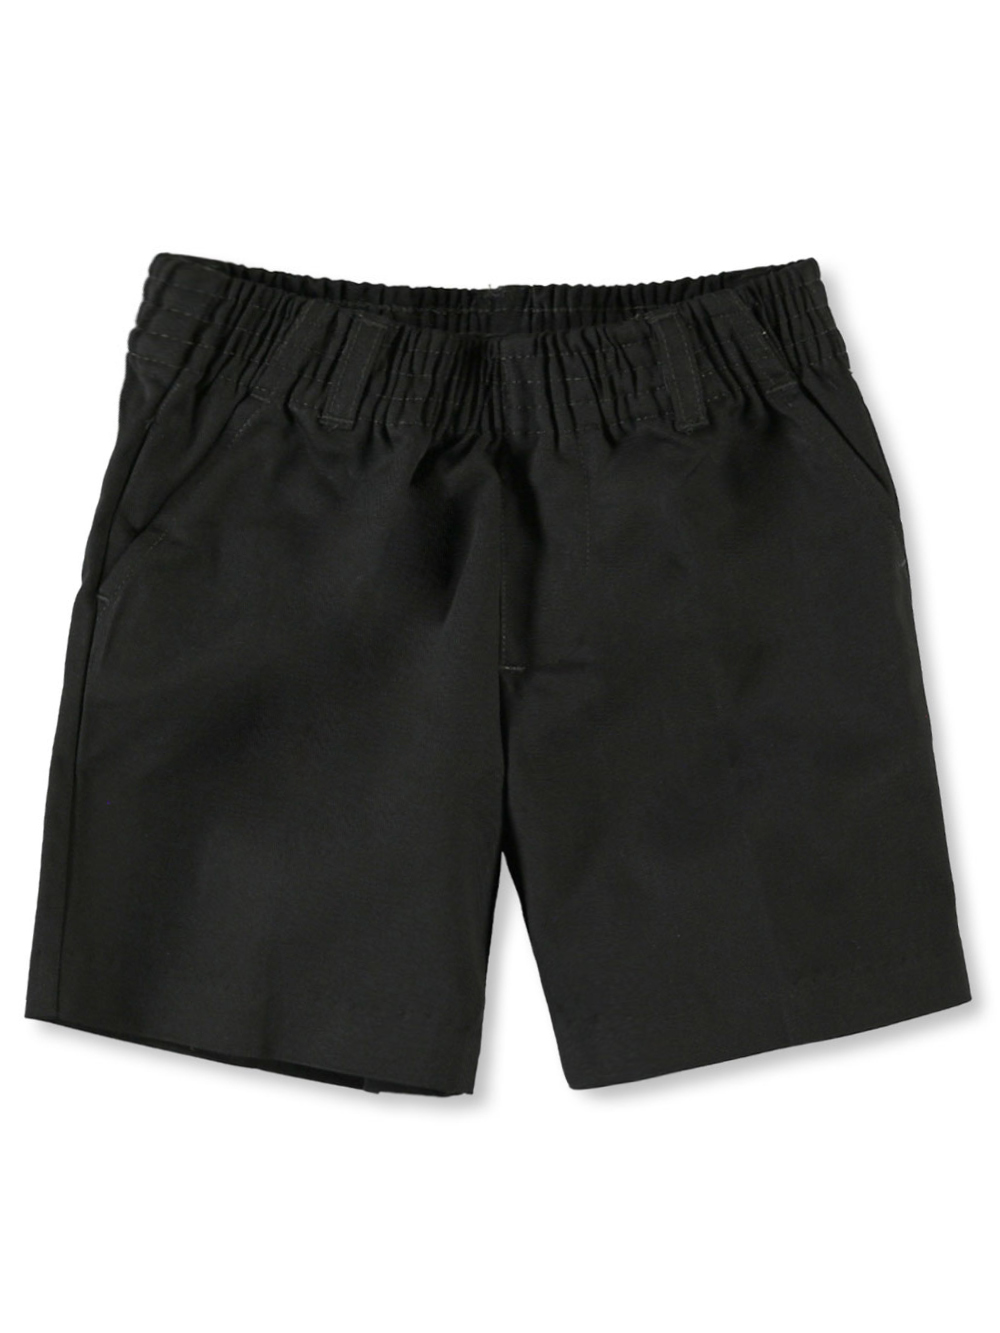 Size 3t Shorts for Boys